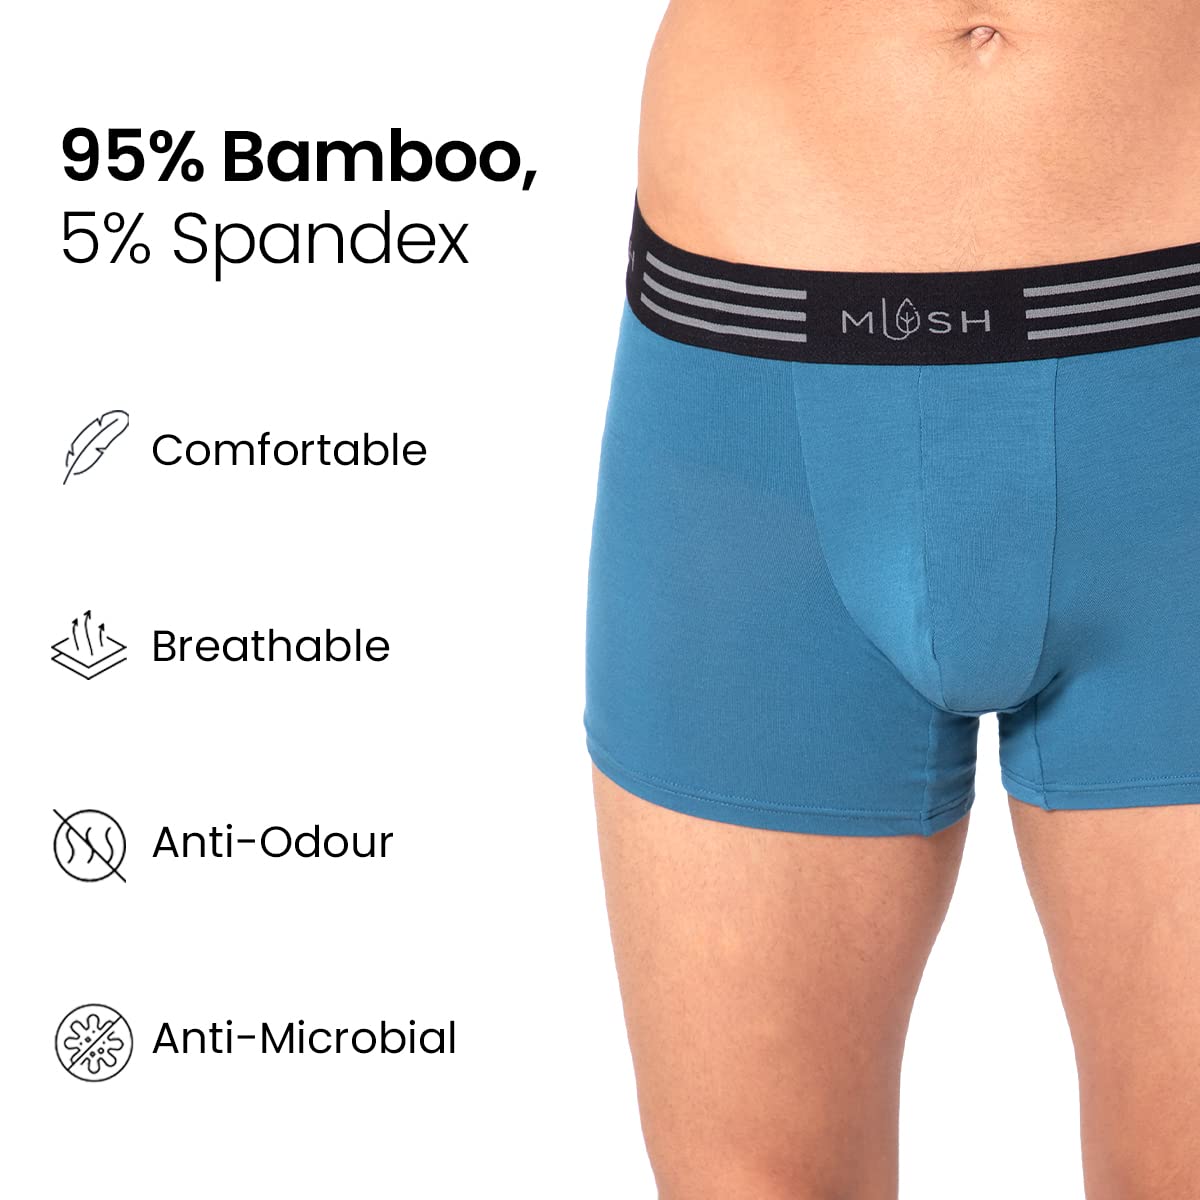 Mush Ultra Soft, Breathable, Feather Light Men's Bamboo Trunk || Naturally Anti-Odor and Anti-Microbial Bamboo Innerwear Pack of 3 (XL, Grey Blue and Black)